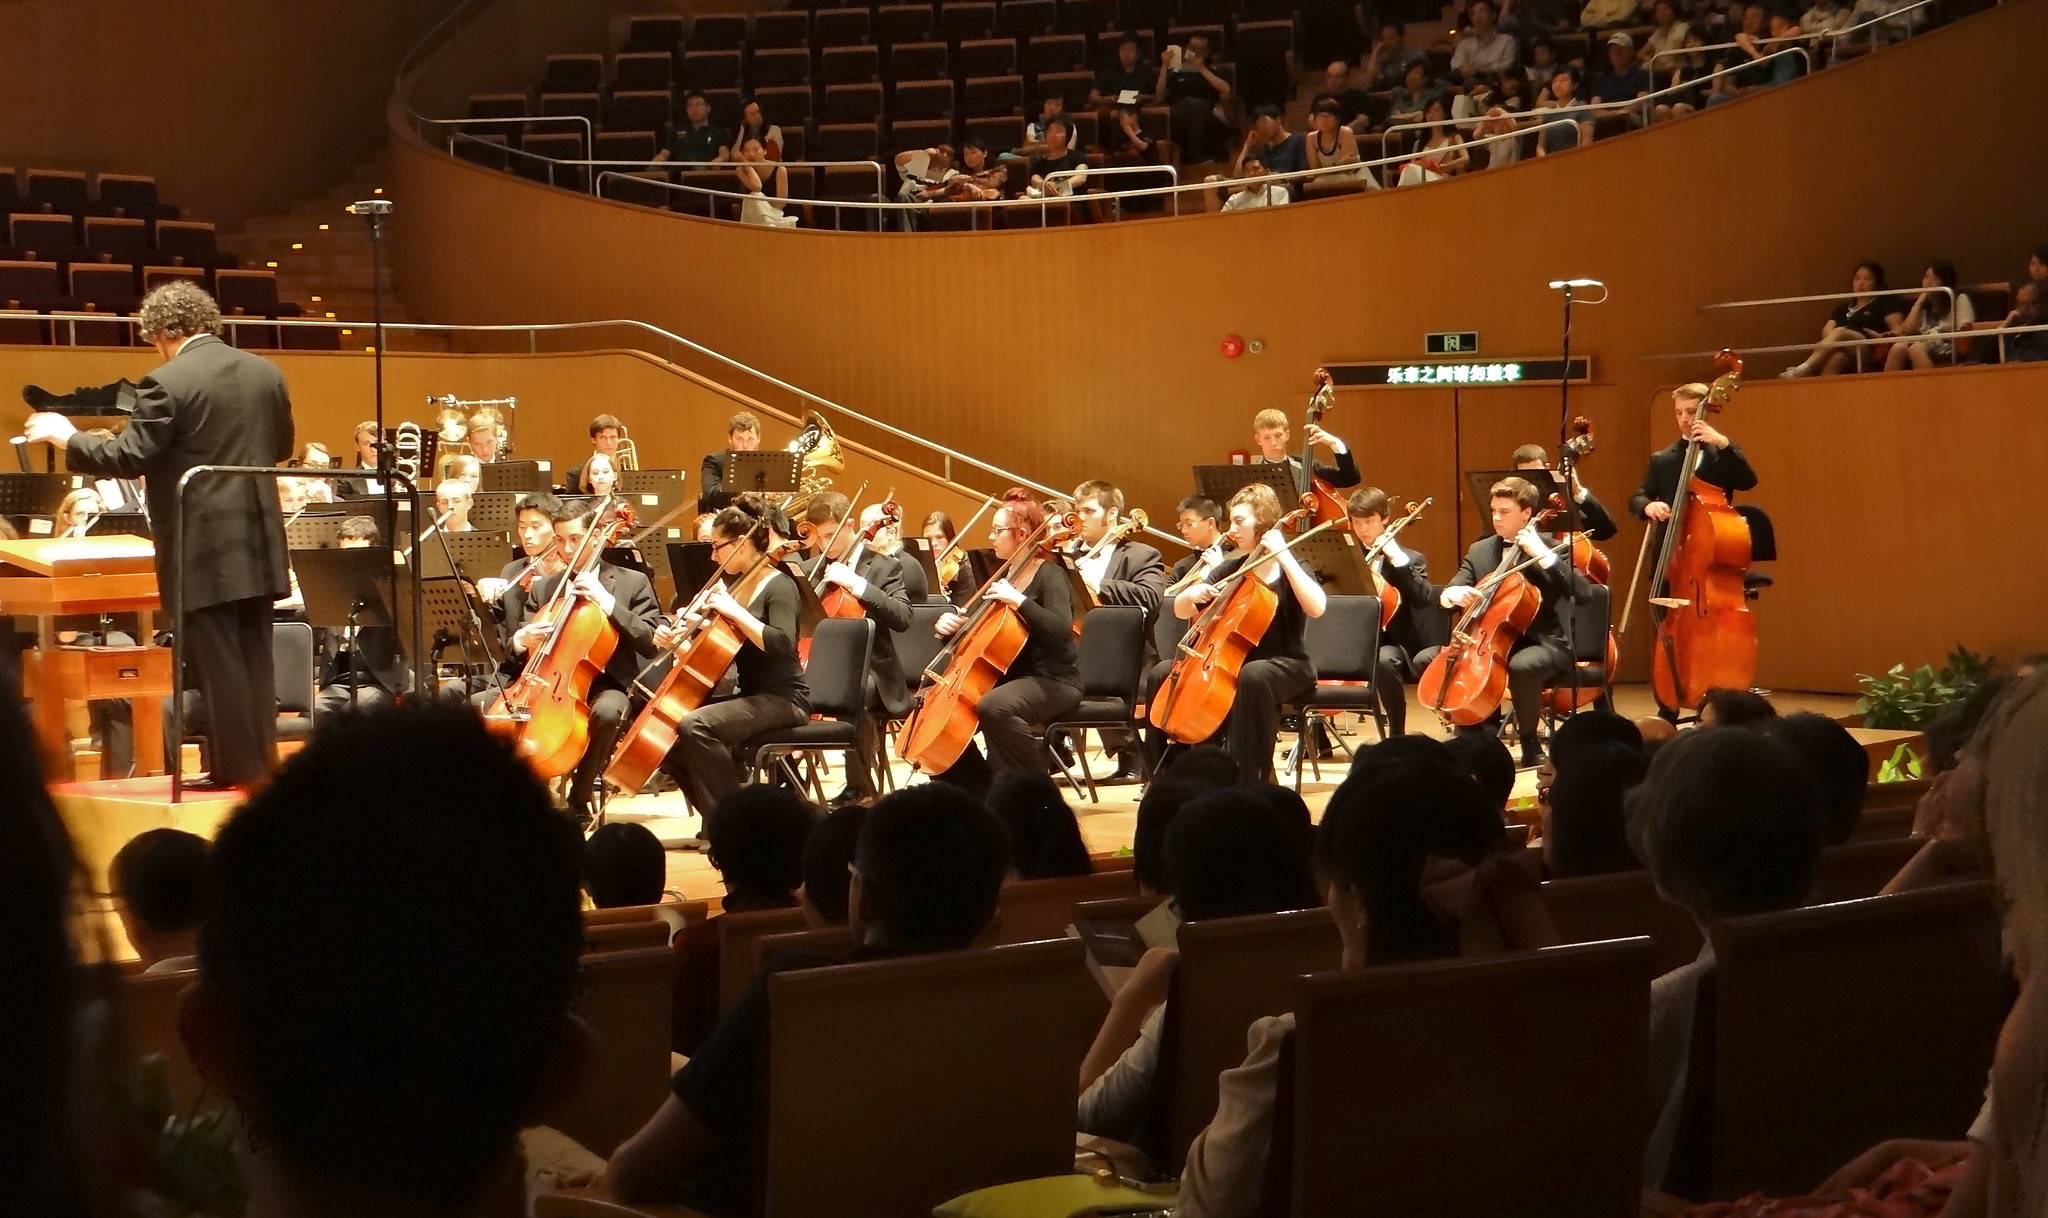 CYSO Final Tour of China Concert @ Shanghai Concert Hall